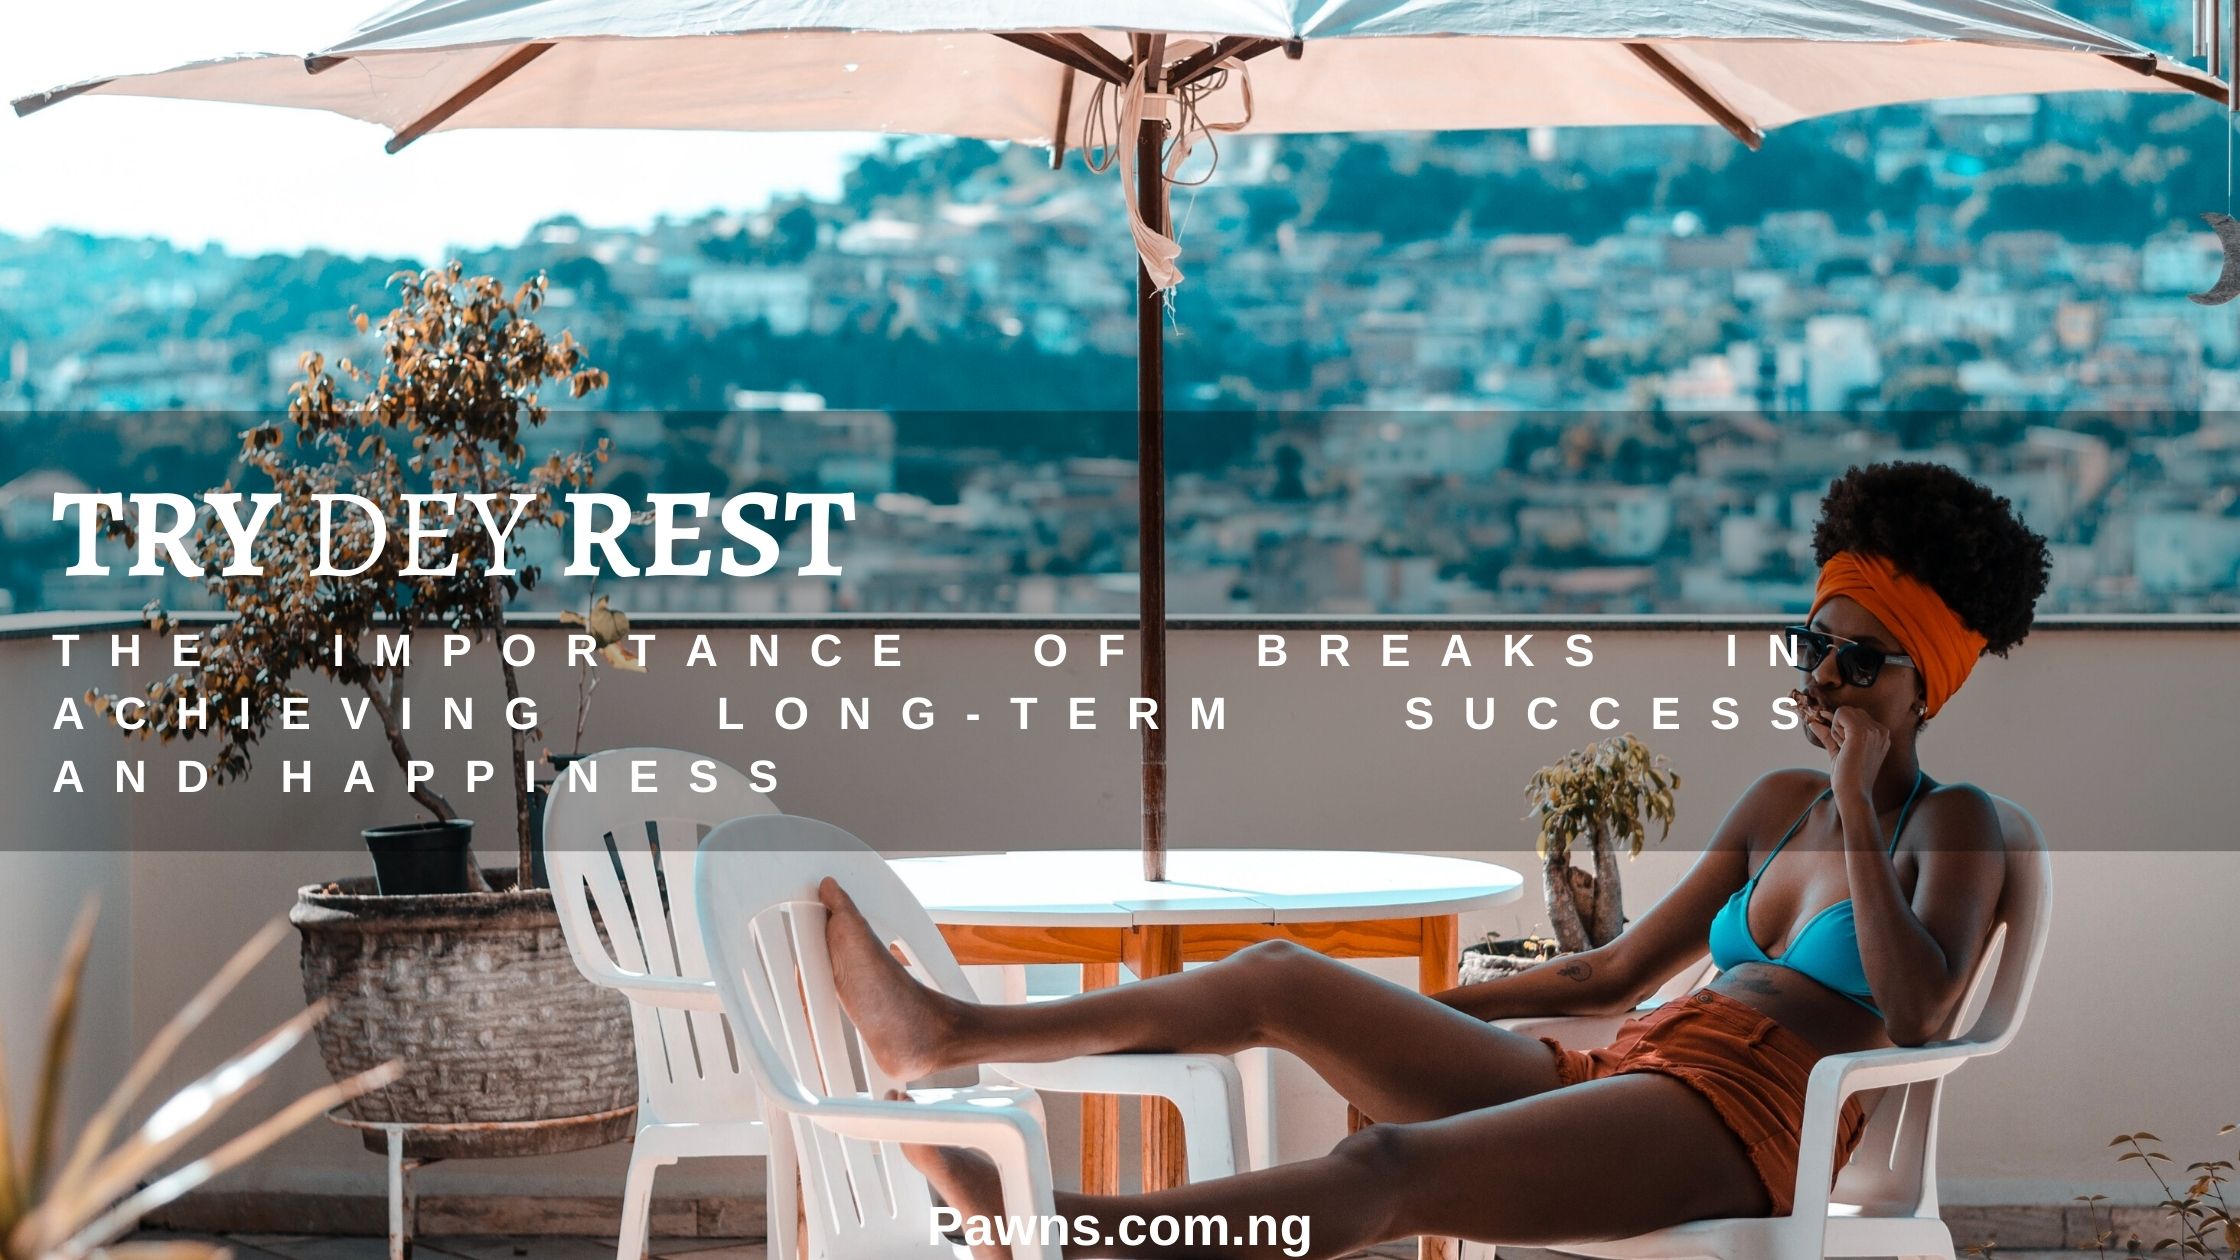 Why is it important to take breaks?